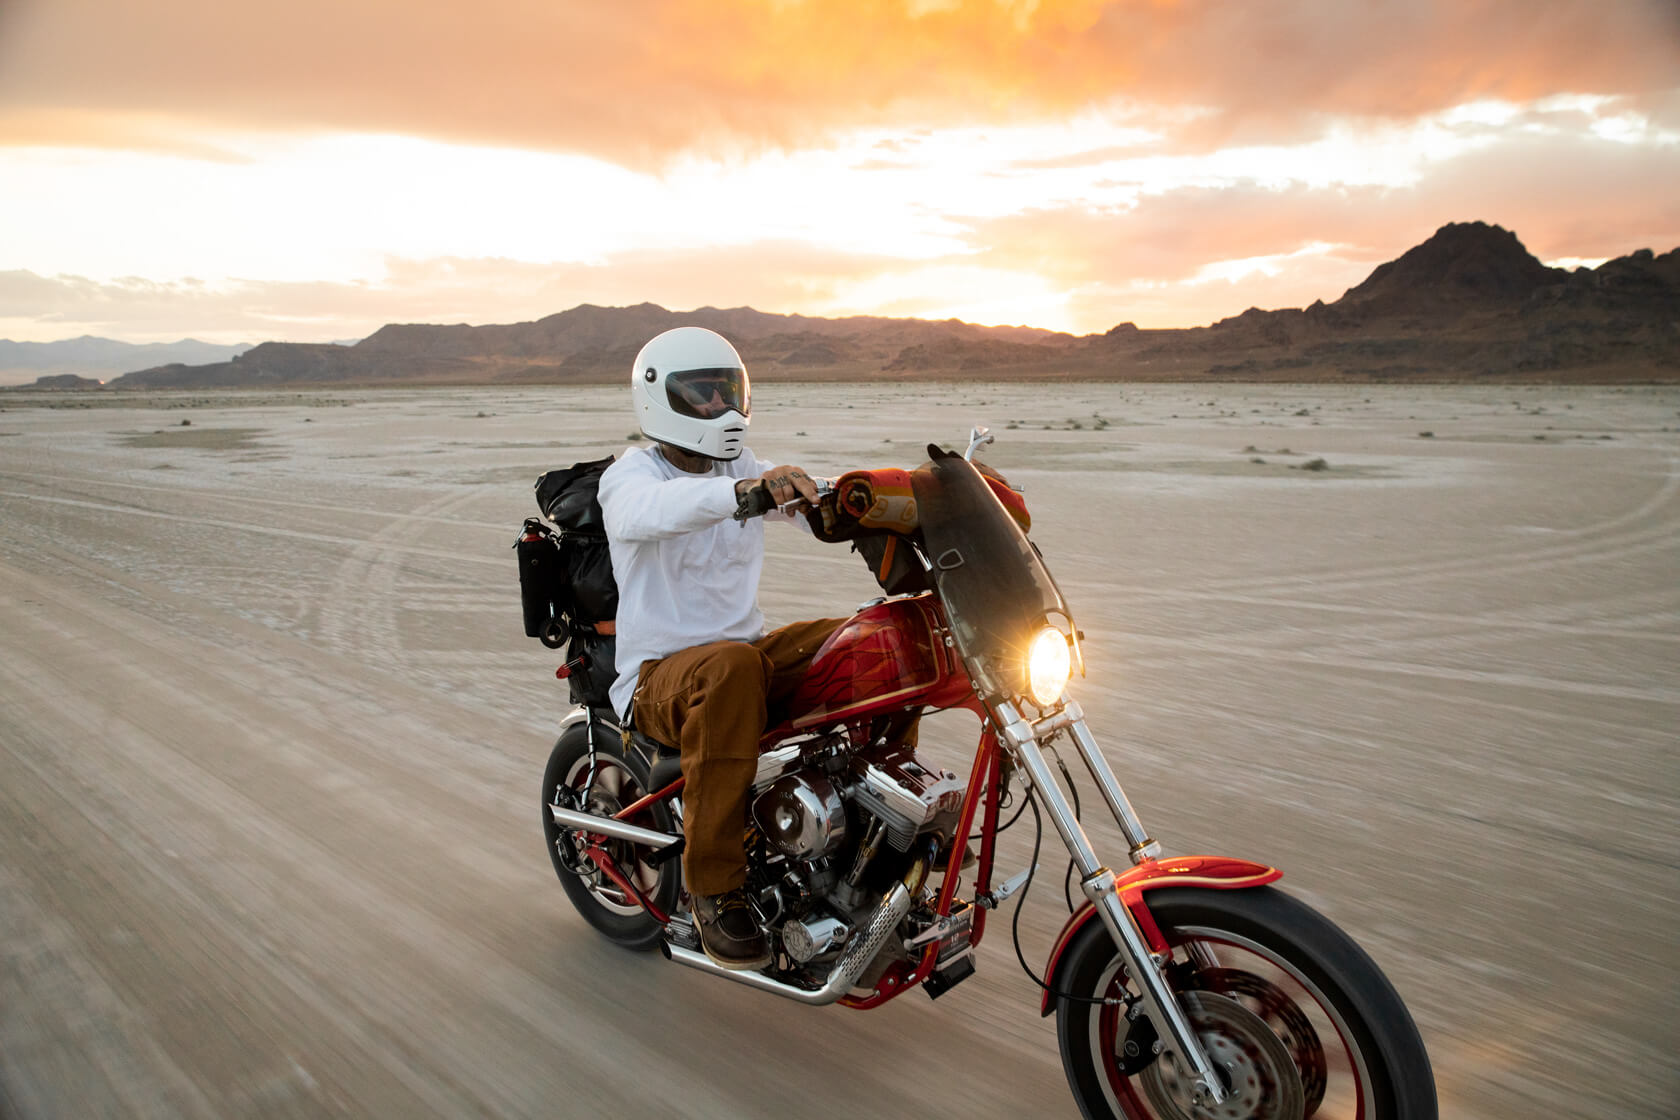 Image of a guy on a motorcycle in the desert